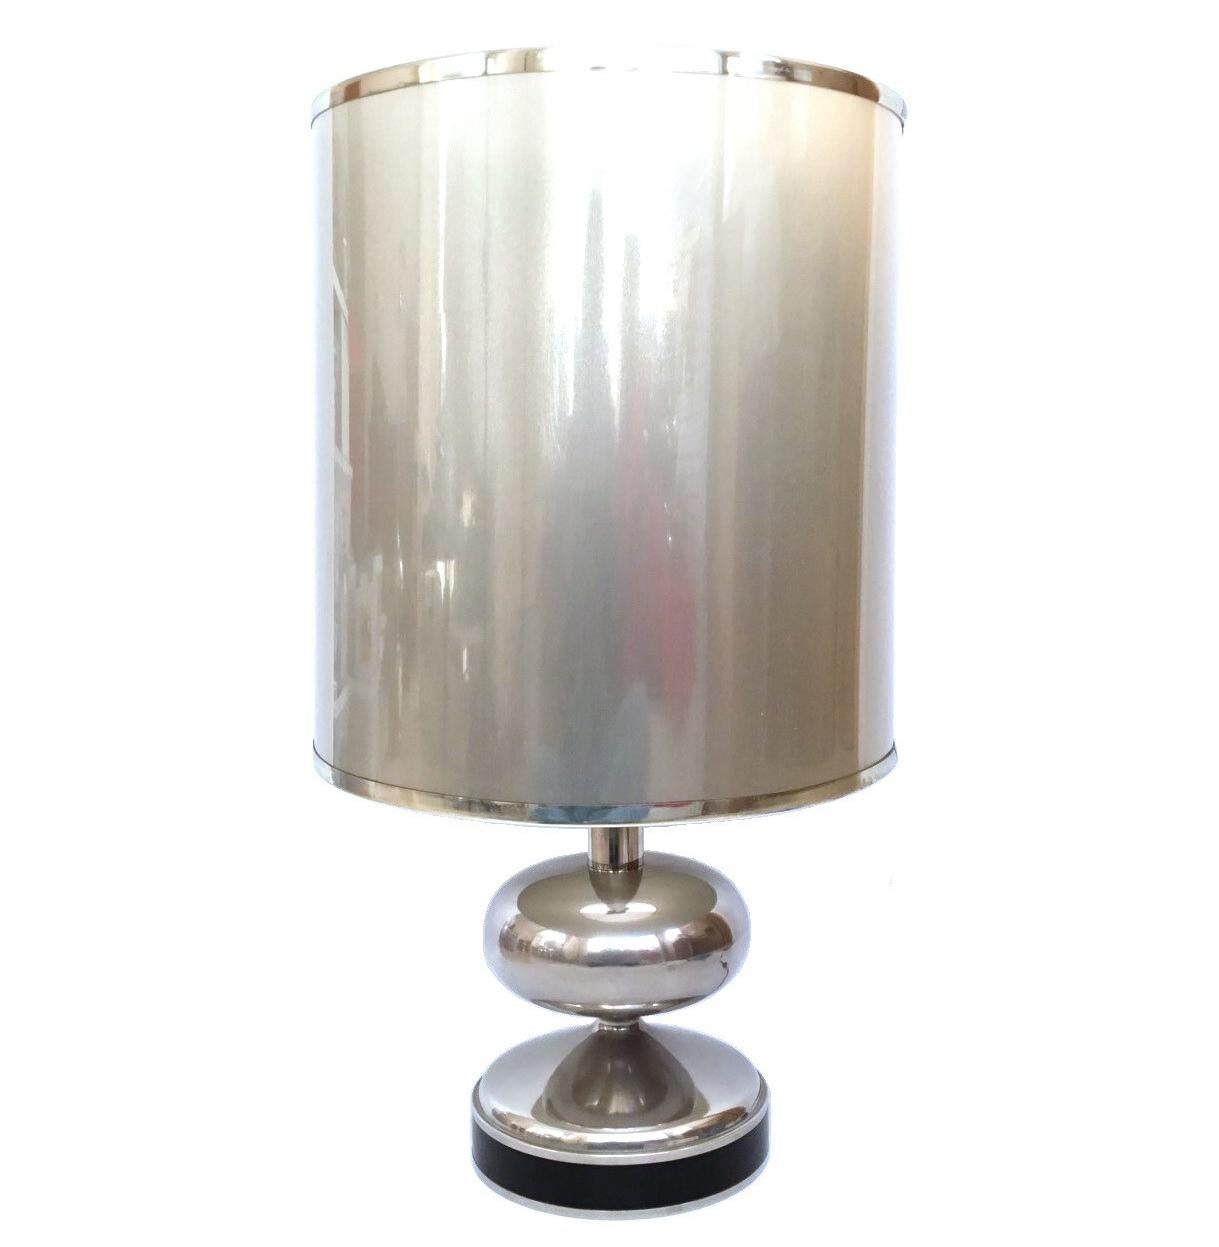 Charming and elegant set of two Spanish table lamps with its original shades. These table lamps were made during the 1970s in Barcelona (Spain).
Each table lamp is equipped with two light sockets (E27). A professional electrician has checked and